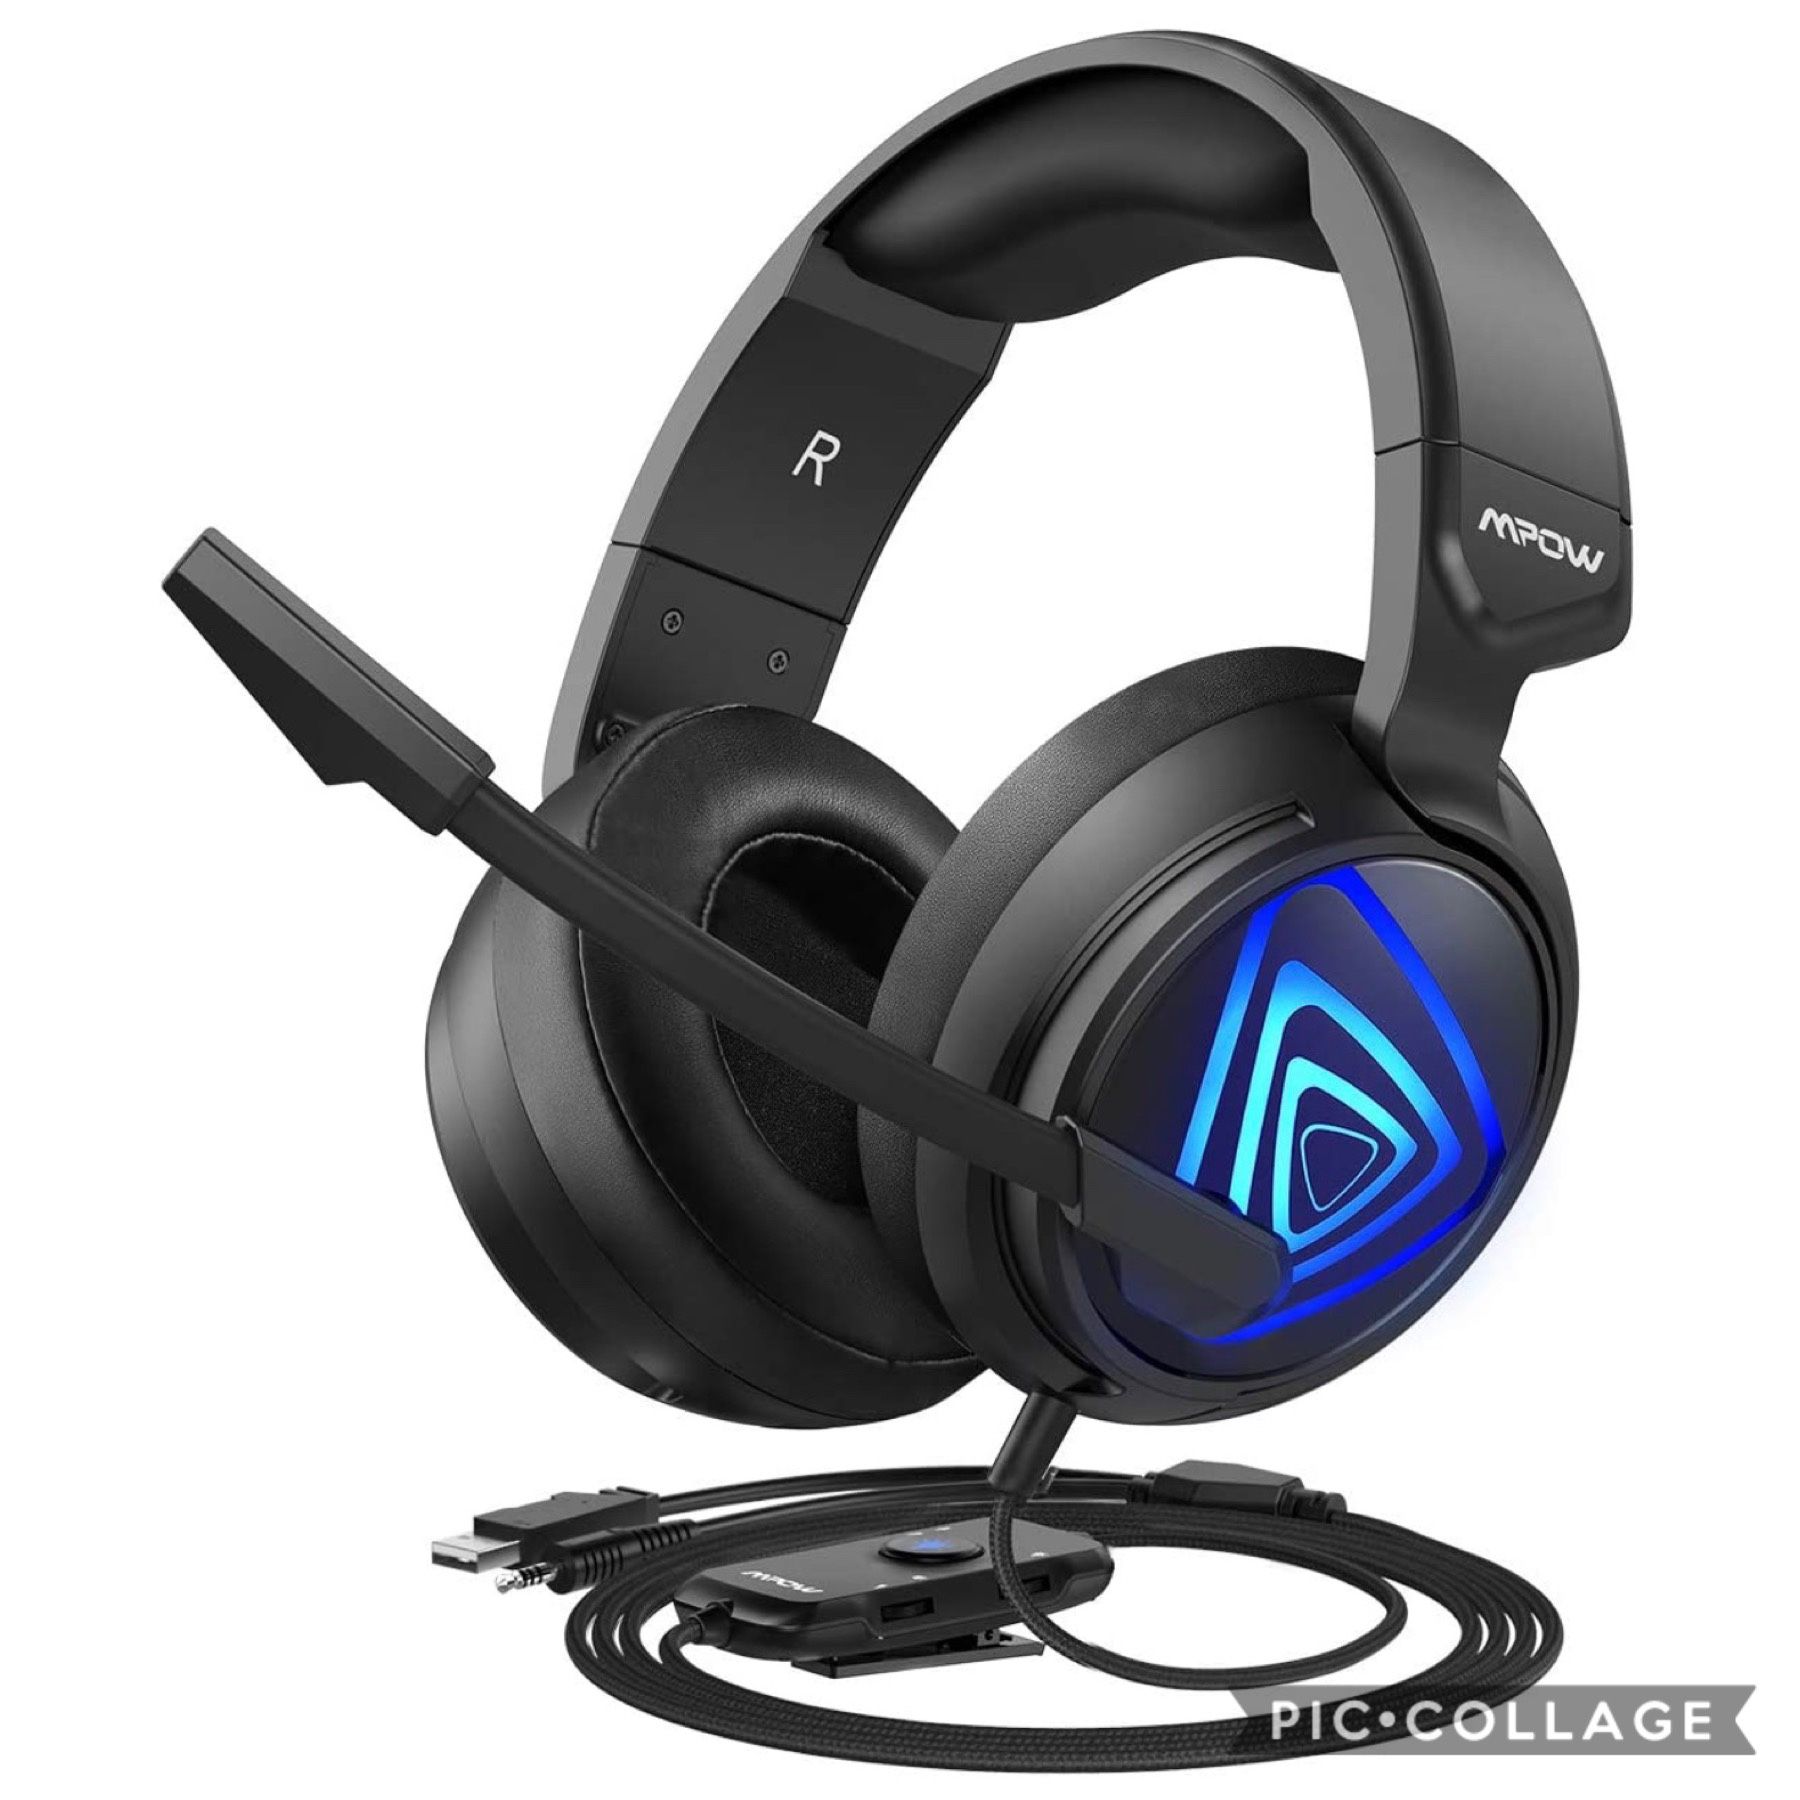 Gaming Headset for Xbox One, PS4 Headset with Noise Canceling Mic & 7.1 Stereo Surround Bass, Xbox One Headset with LED Light, Over Ear Headphones -